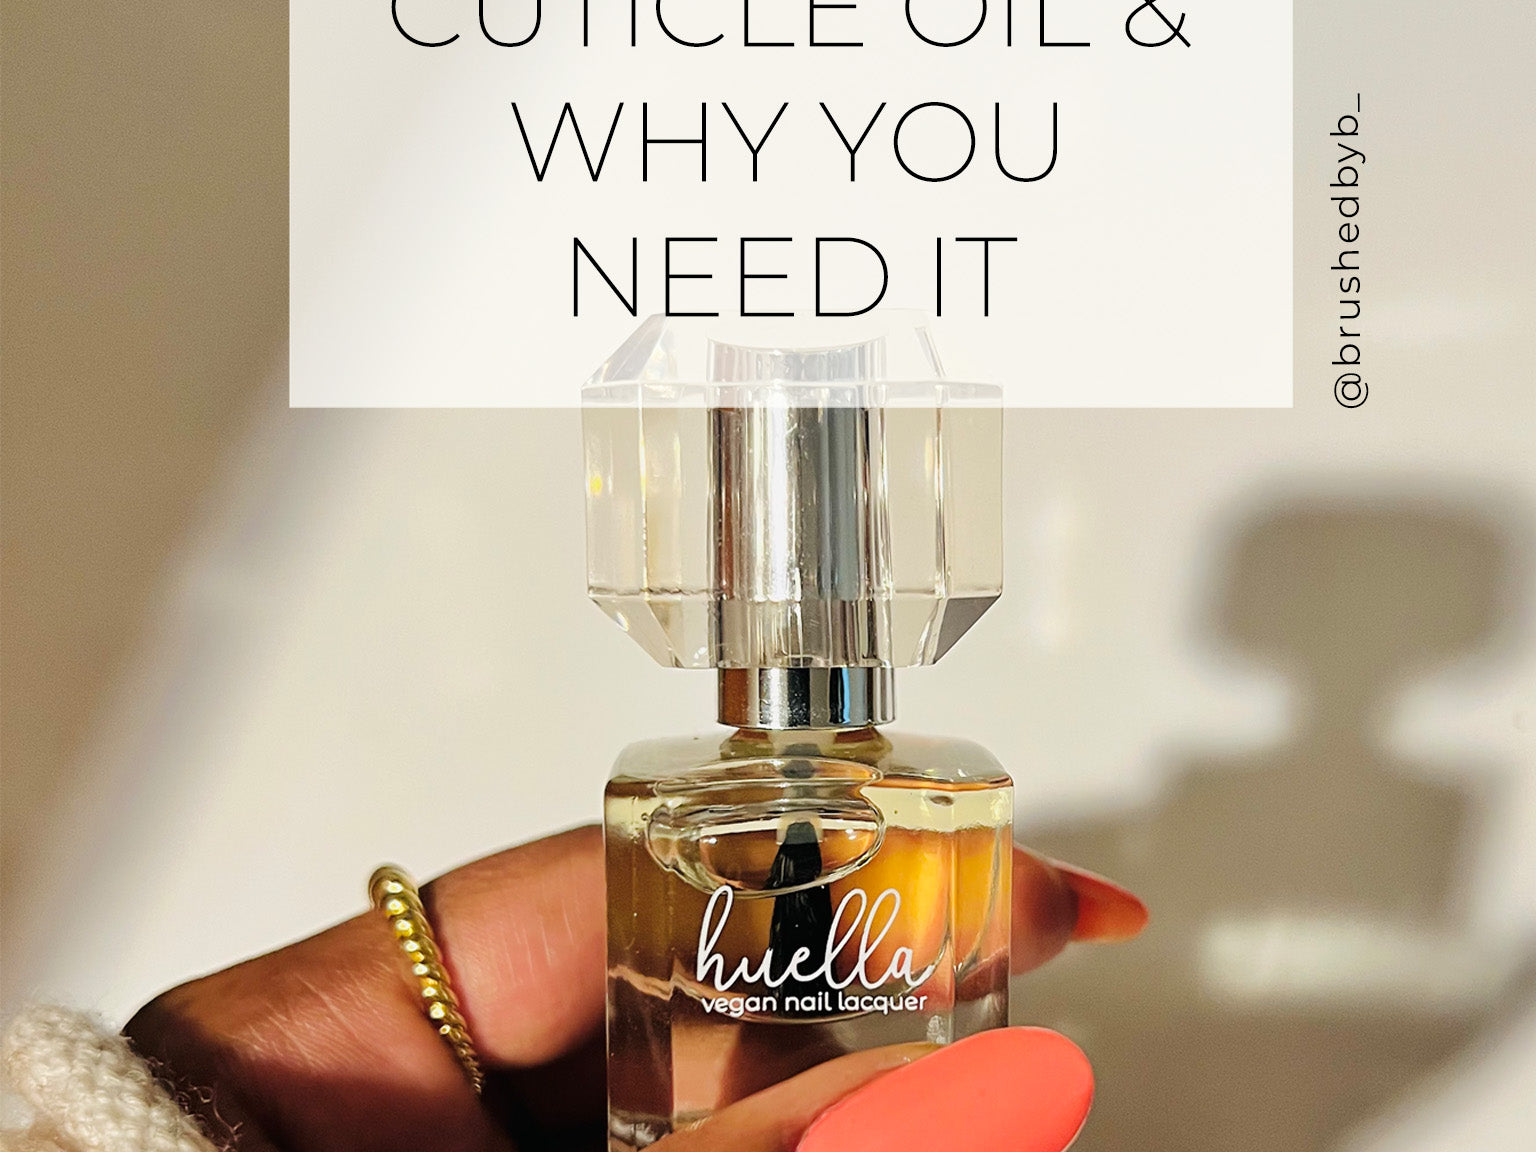 Benefits Of Cuticle Oil & Why You Need It